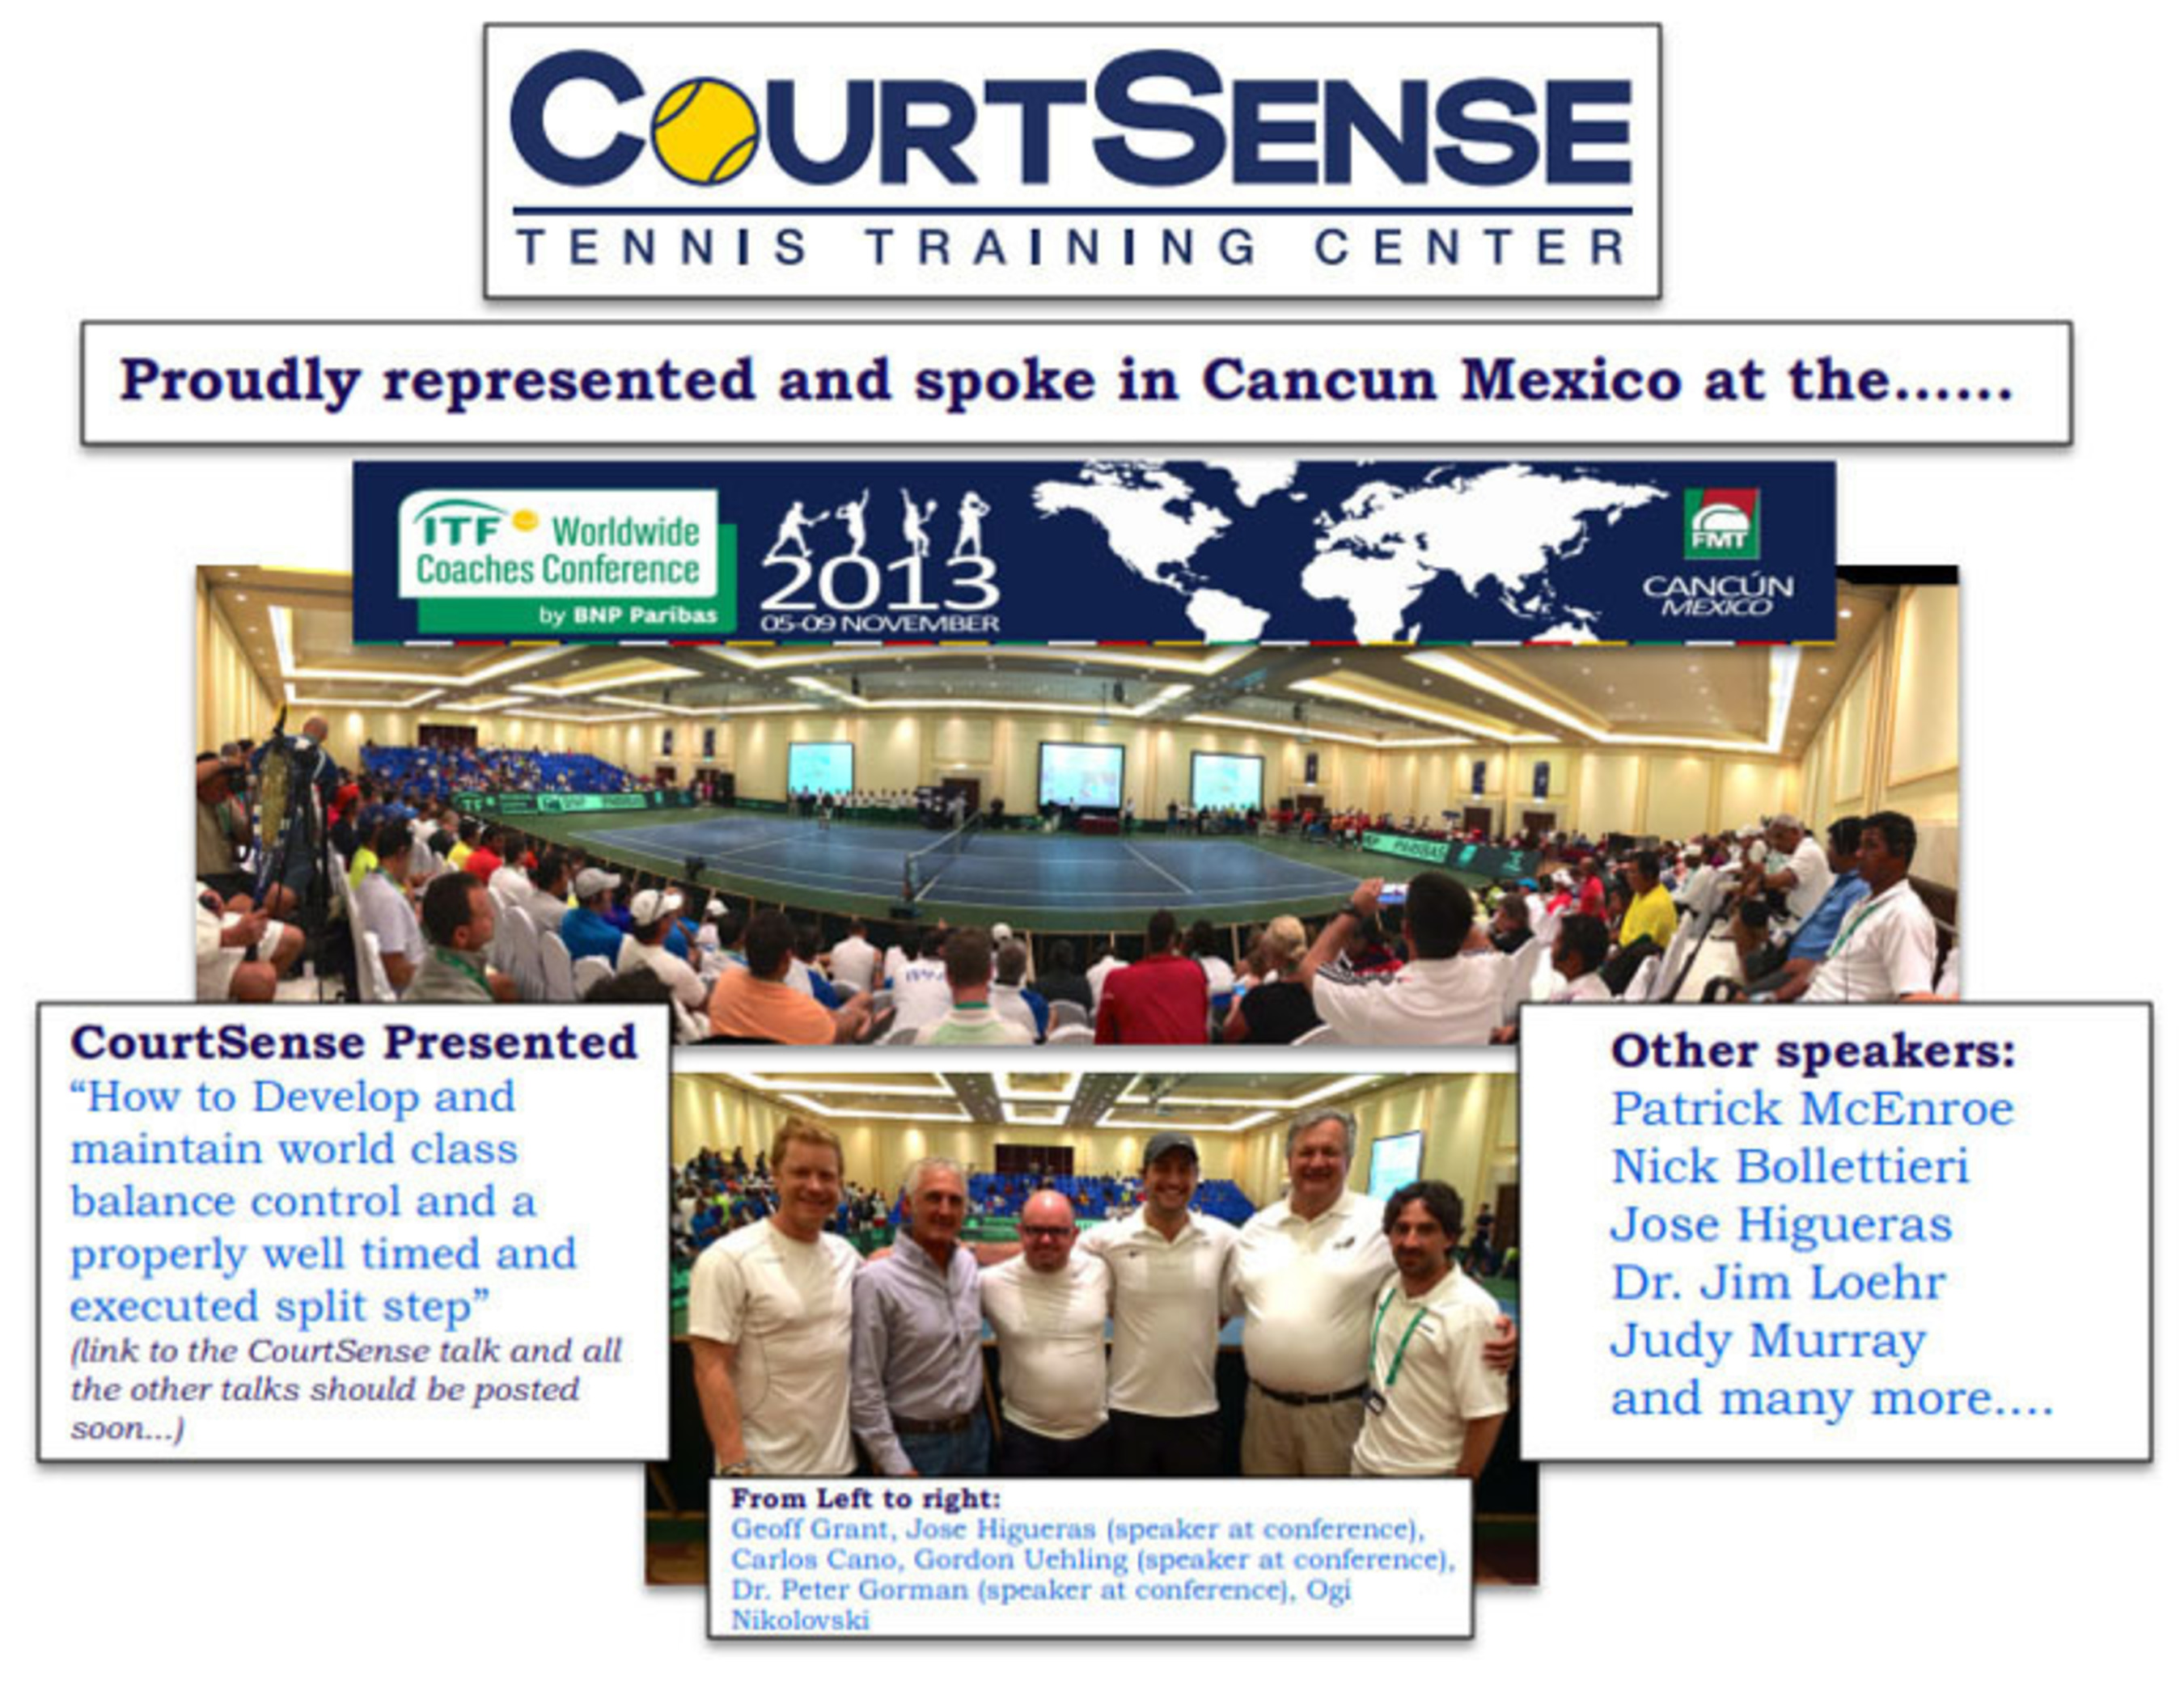 CourtSense presented at ITF Worldwide Coaches Conference in Cancun, Mexico. (PRNewsFoto/Sports Split Step) (PRNewsFoto/SPORTS SPLIT STEP)